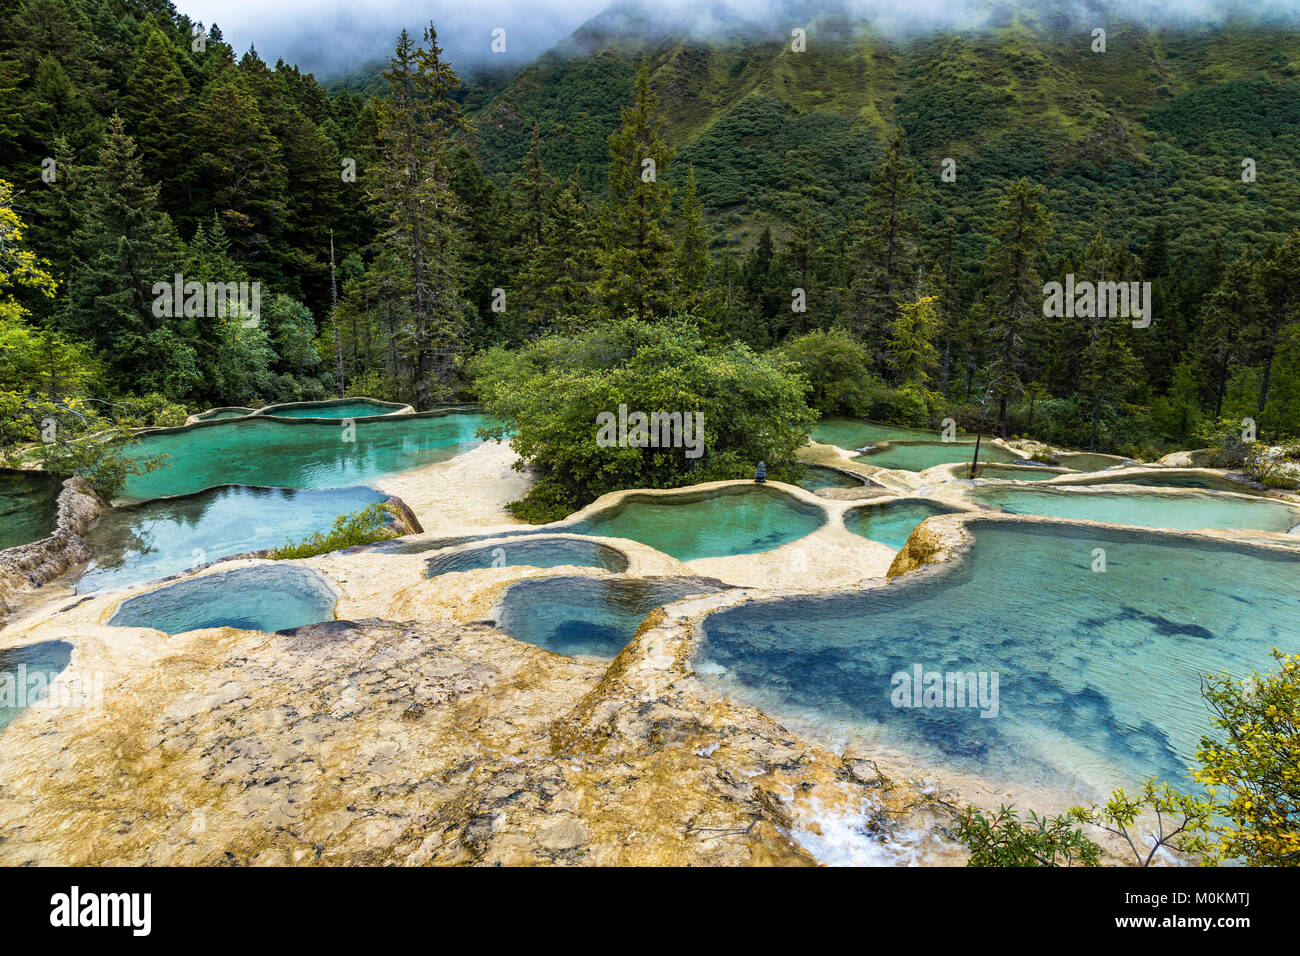 Huanglong National Park, Sichuan, China, famous for its colorful pools formed by calcite deposits. Situated at more than 3000m elevation, it is a UNES Stock Photo